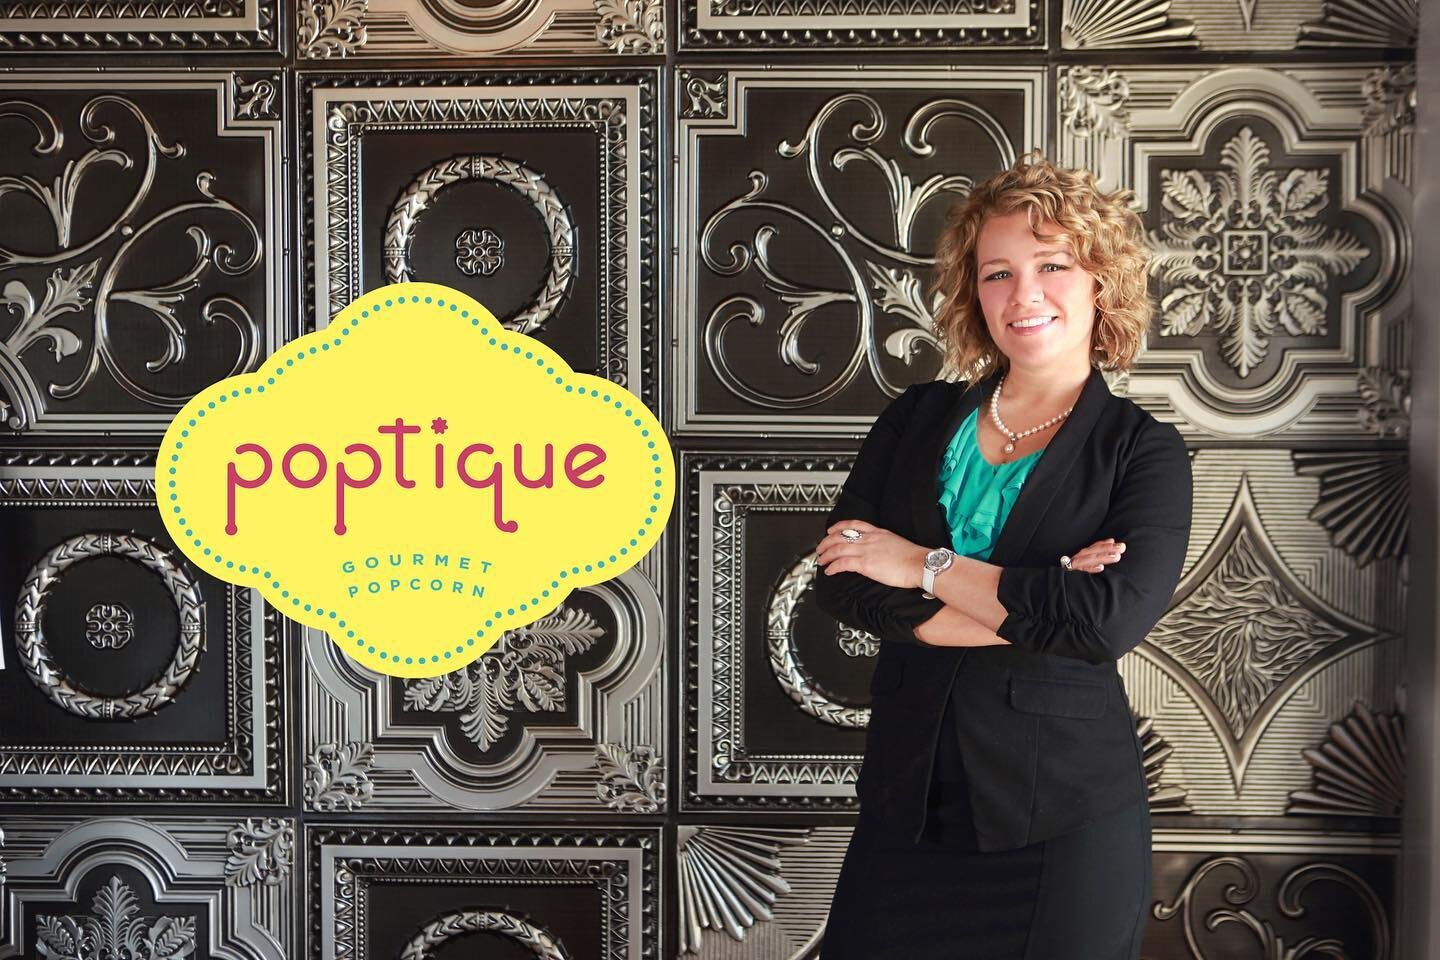 Lindsey Hively, the late founder of Poptique.